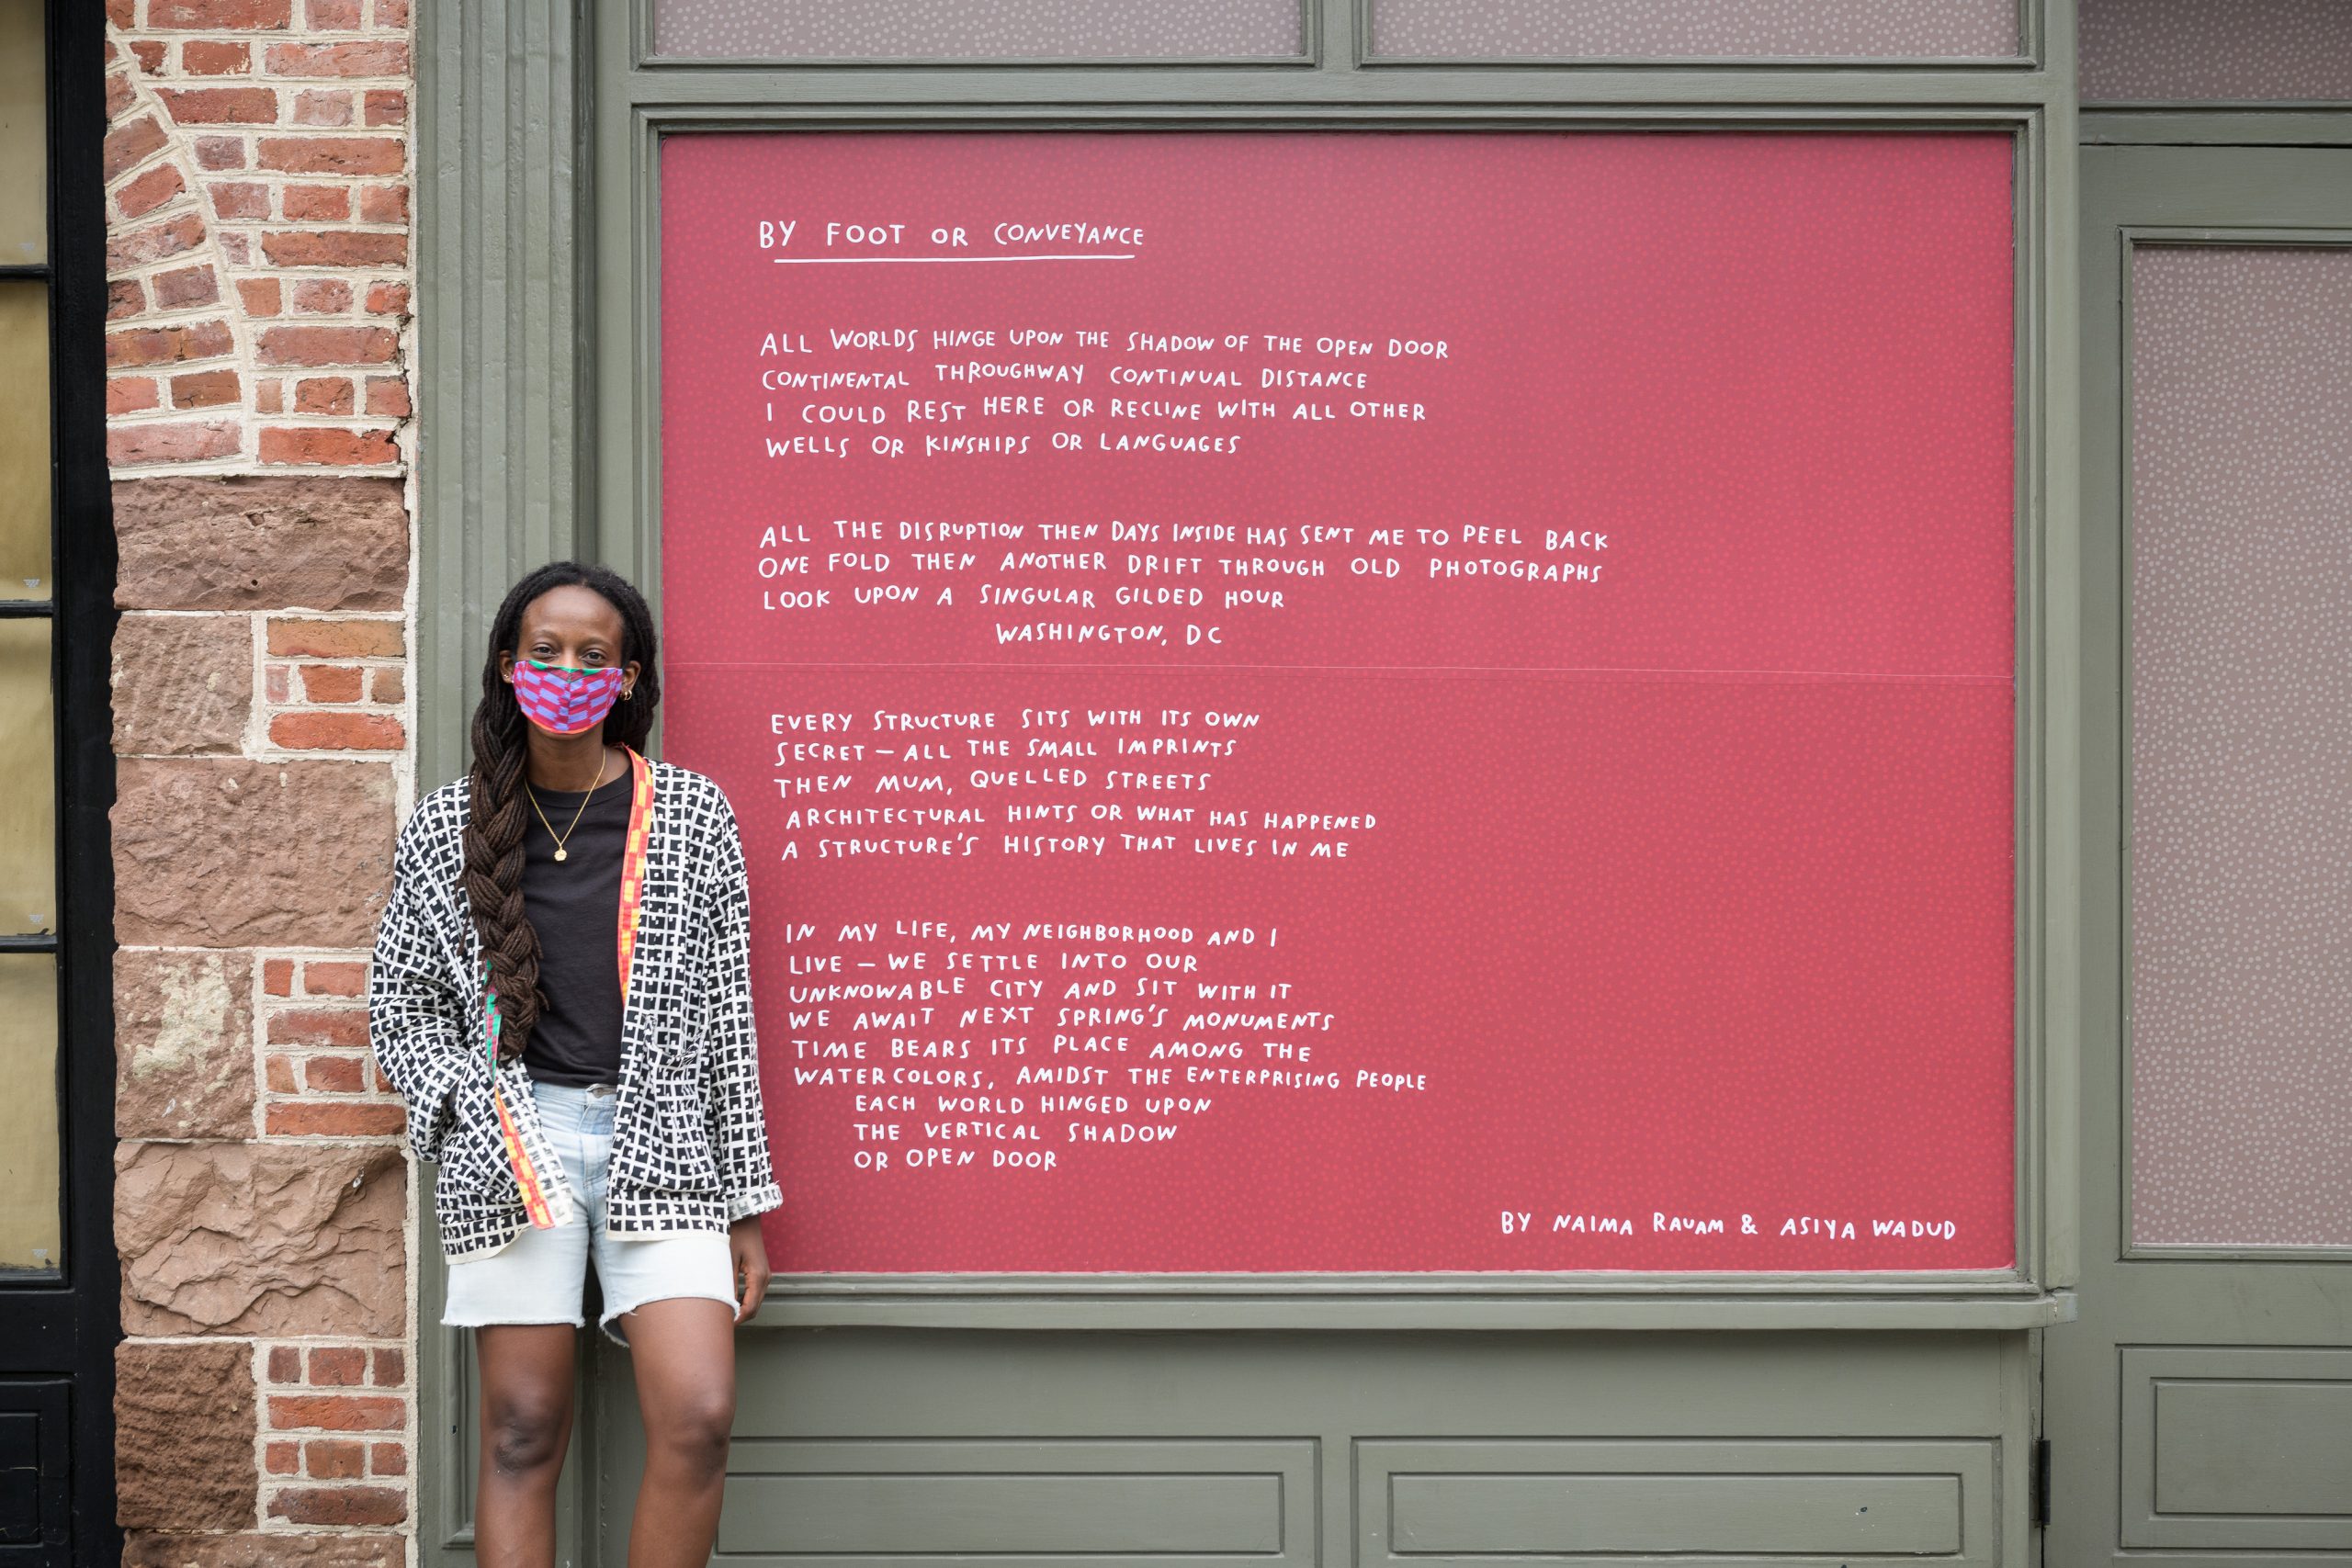 The poet Asiya Wadud stands by one of her pieces from “Echo Exhibit” (2020) in New York City’s Seaport district, co-presented by the Lower Manhattan Cultural Council (LMCC), the Seaport district and the Howard Hughes Corporation as part of River To River 2020: Four Voices.